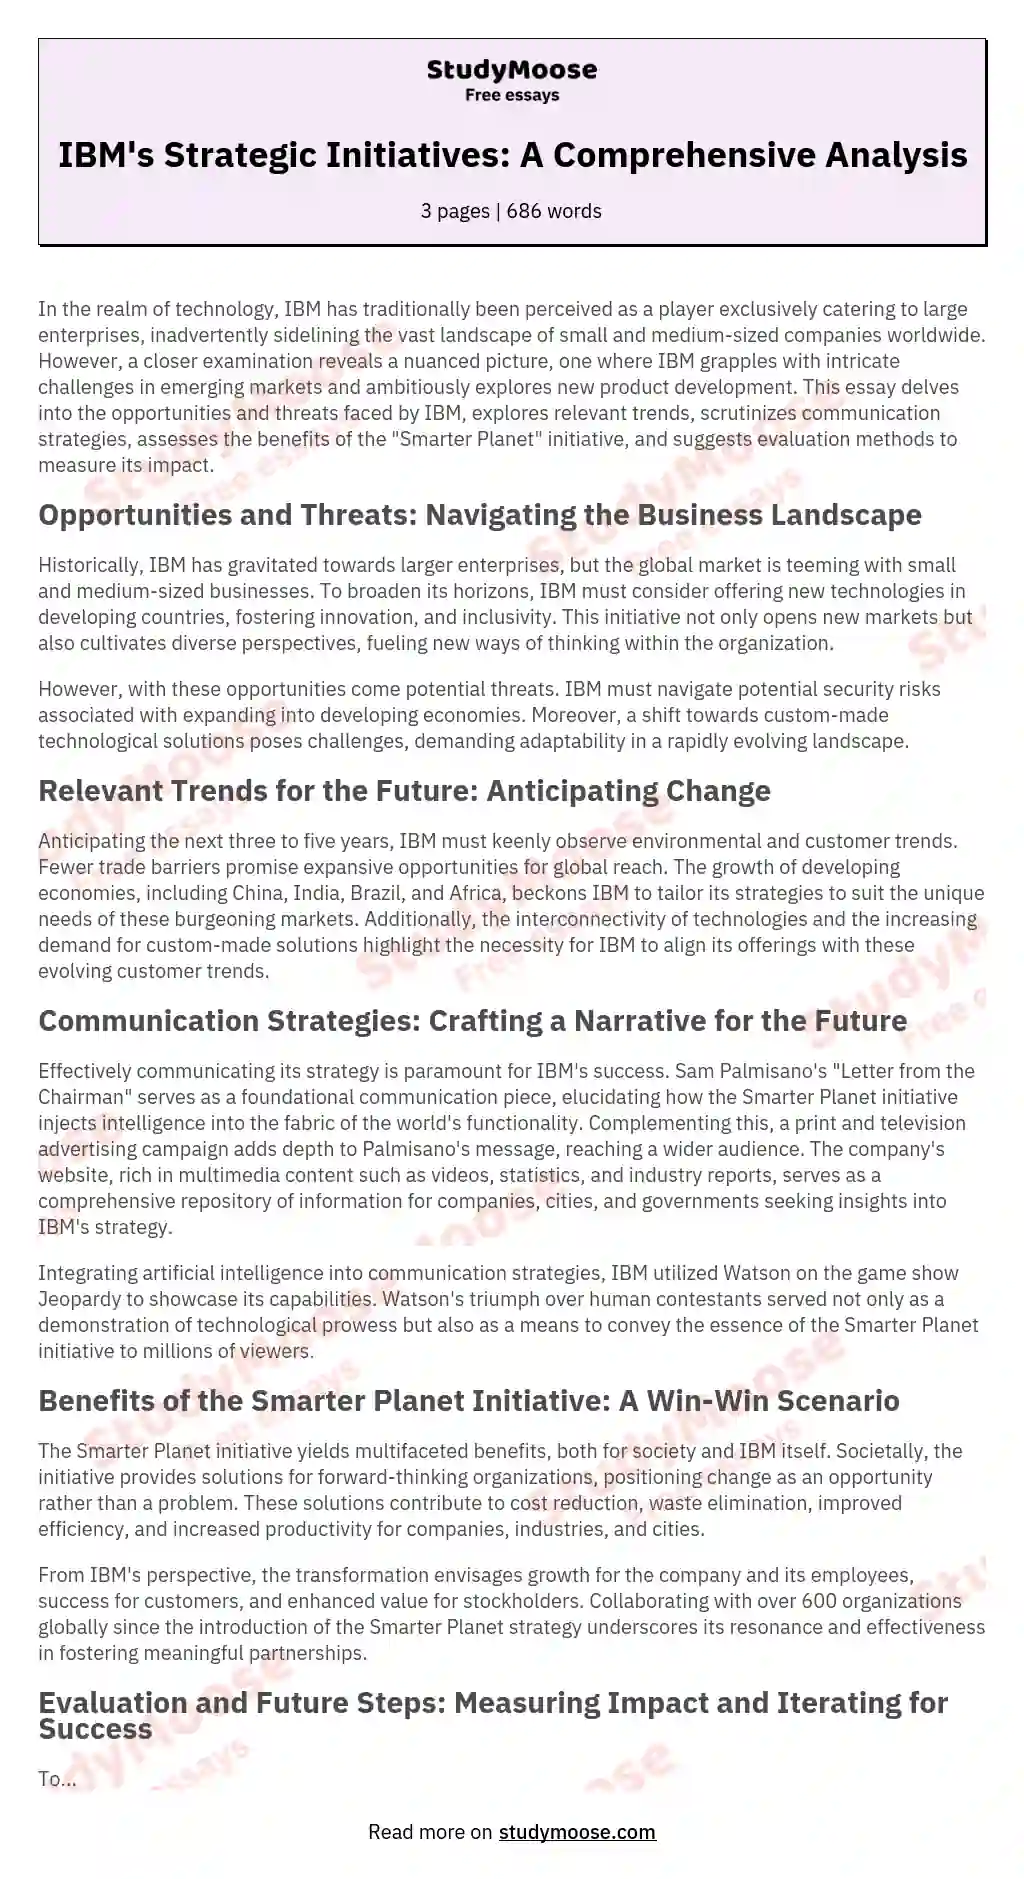 The SWOT analysis for IBM’s Smarter Planet initiative is as follows